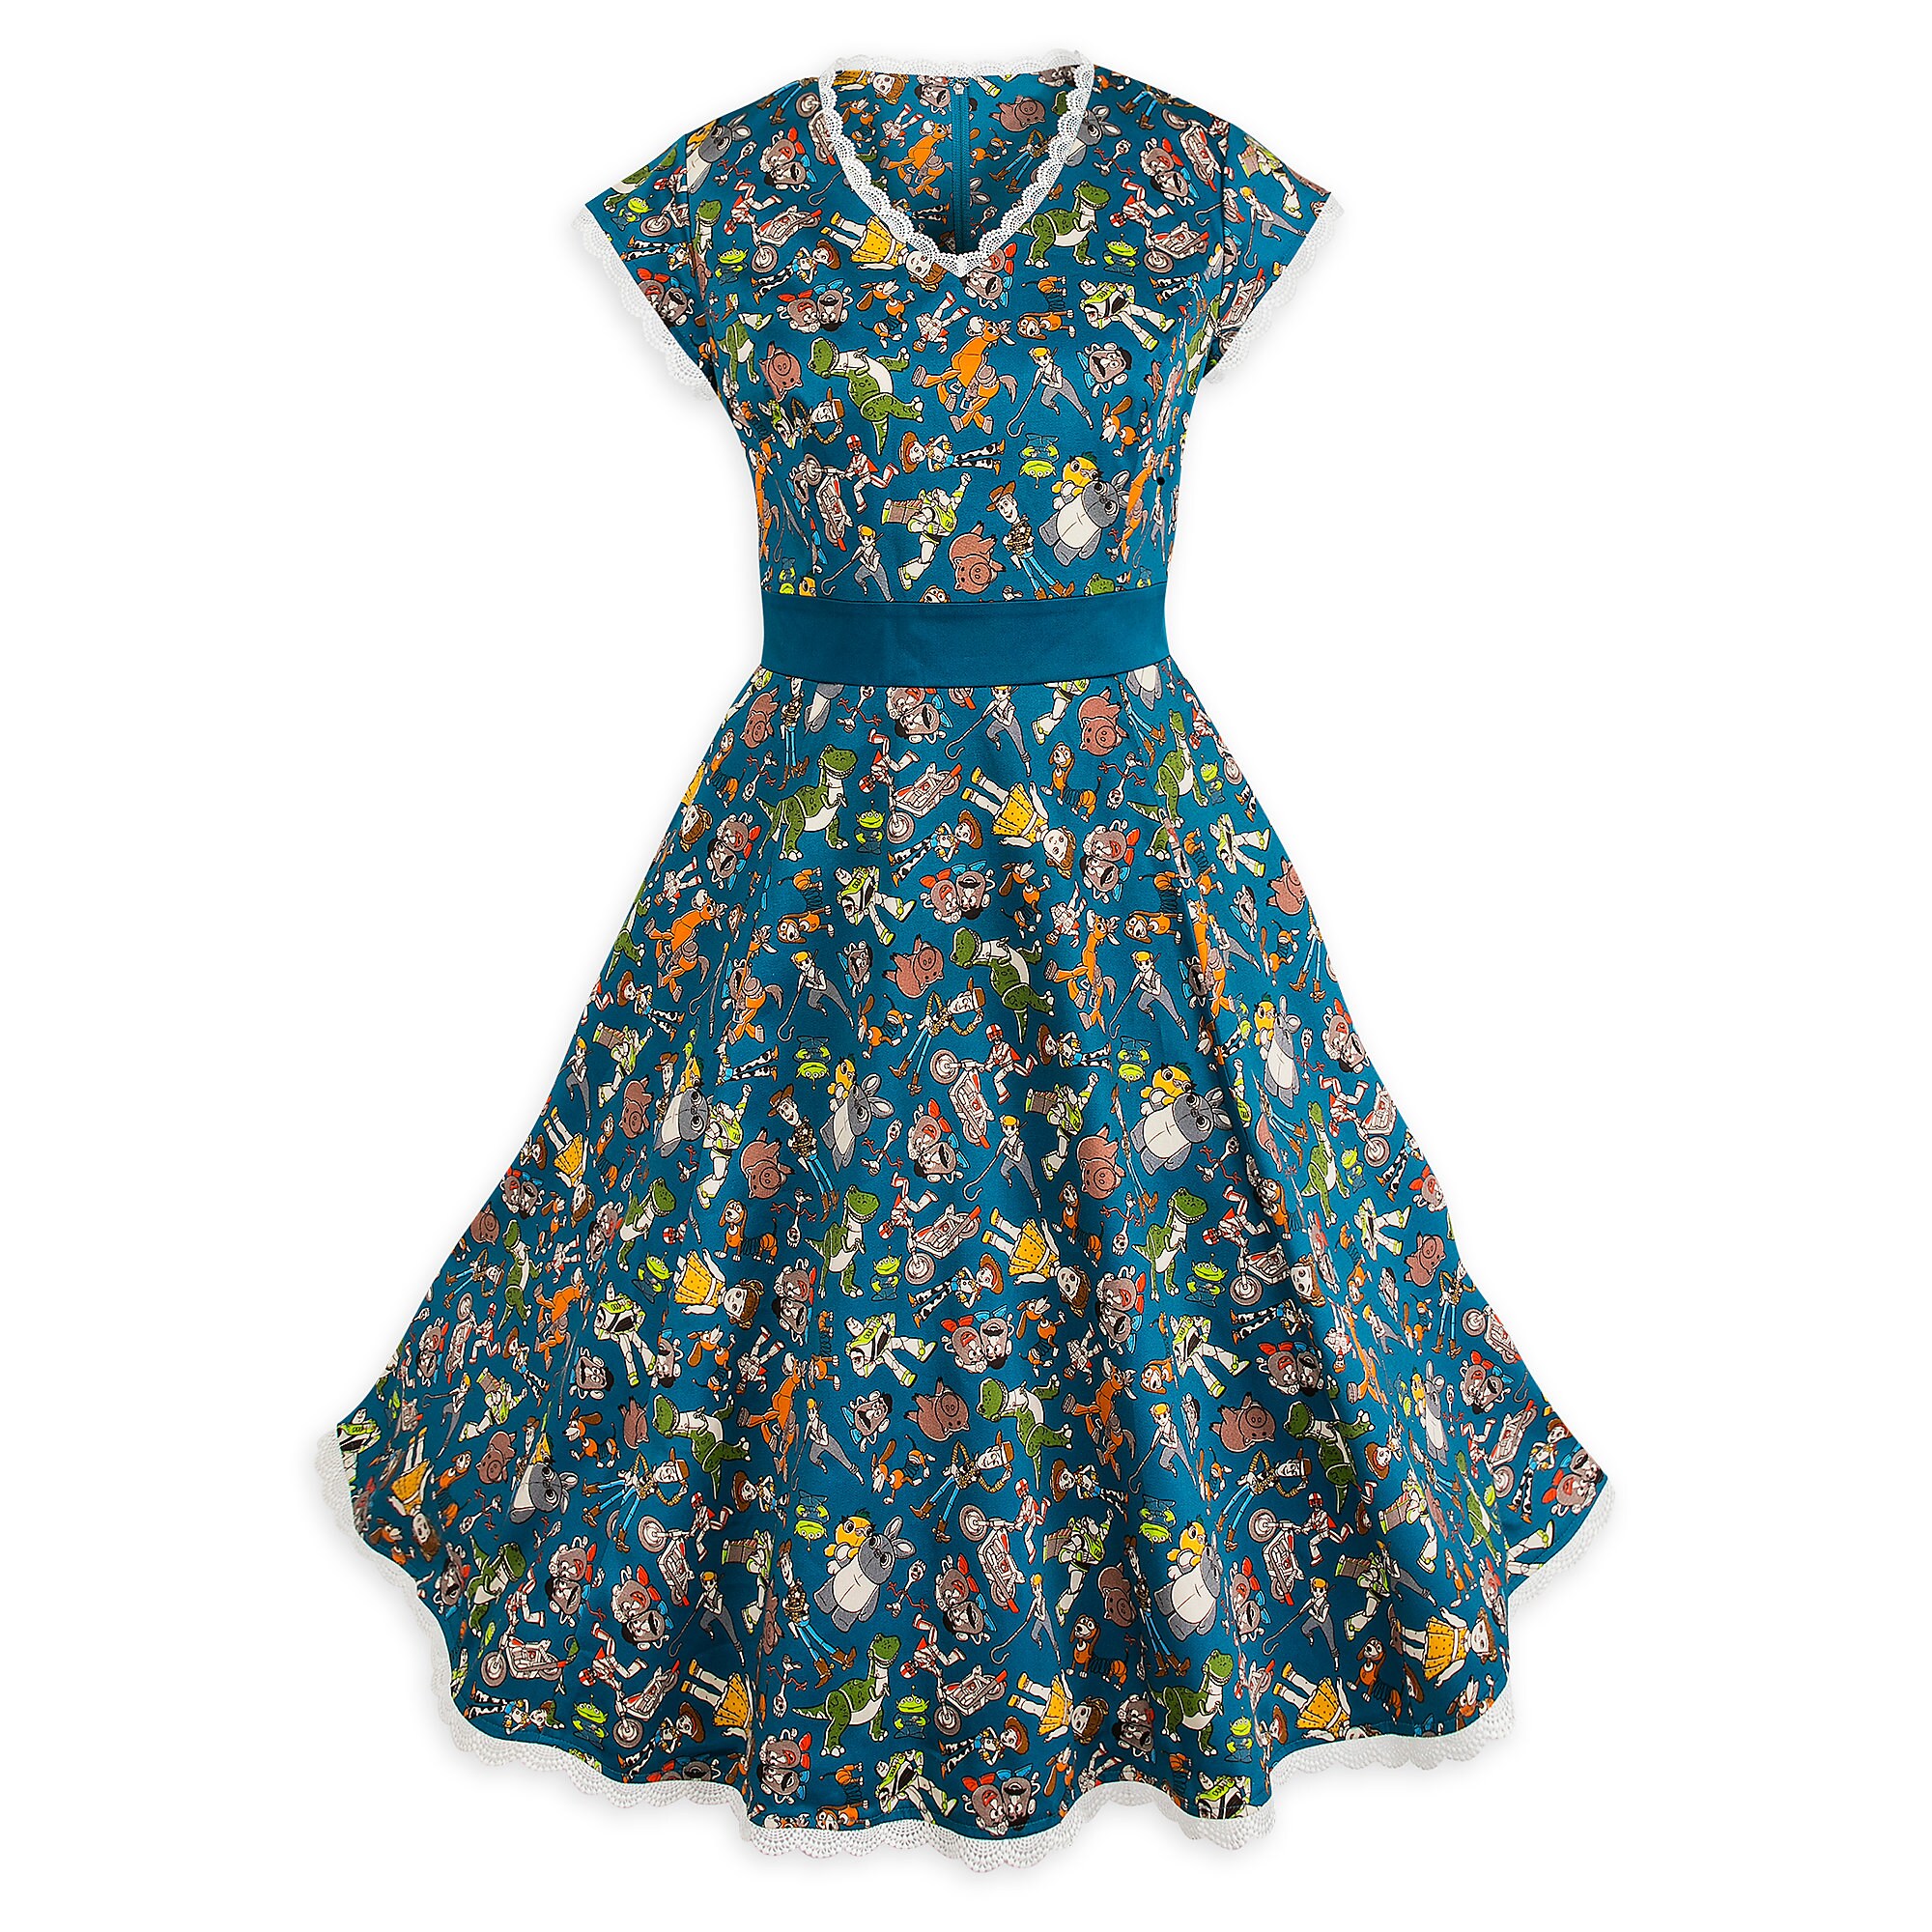 Toy Story 4 Dress for Women